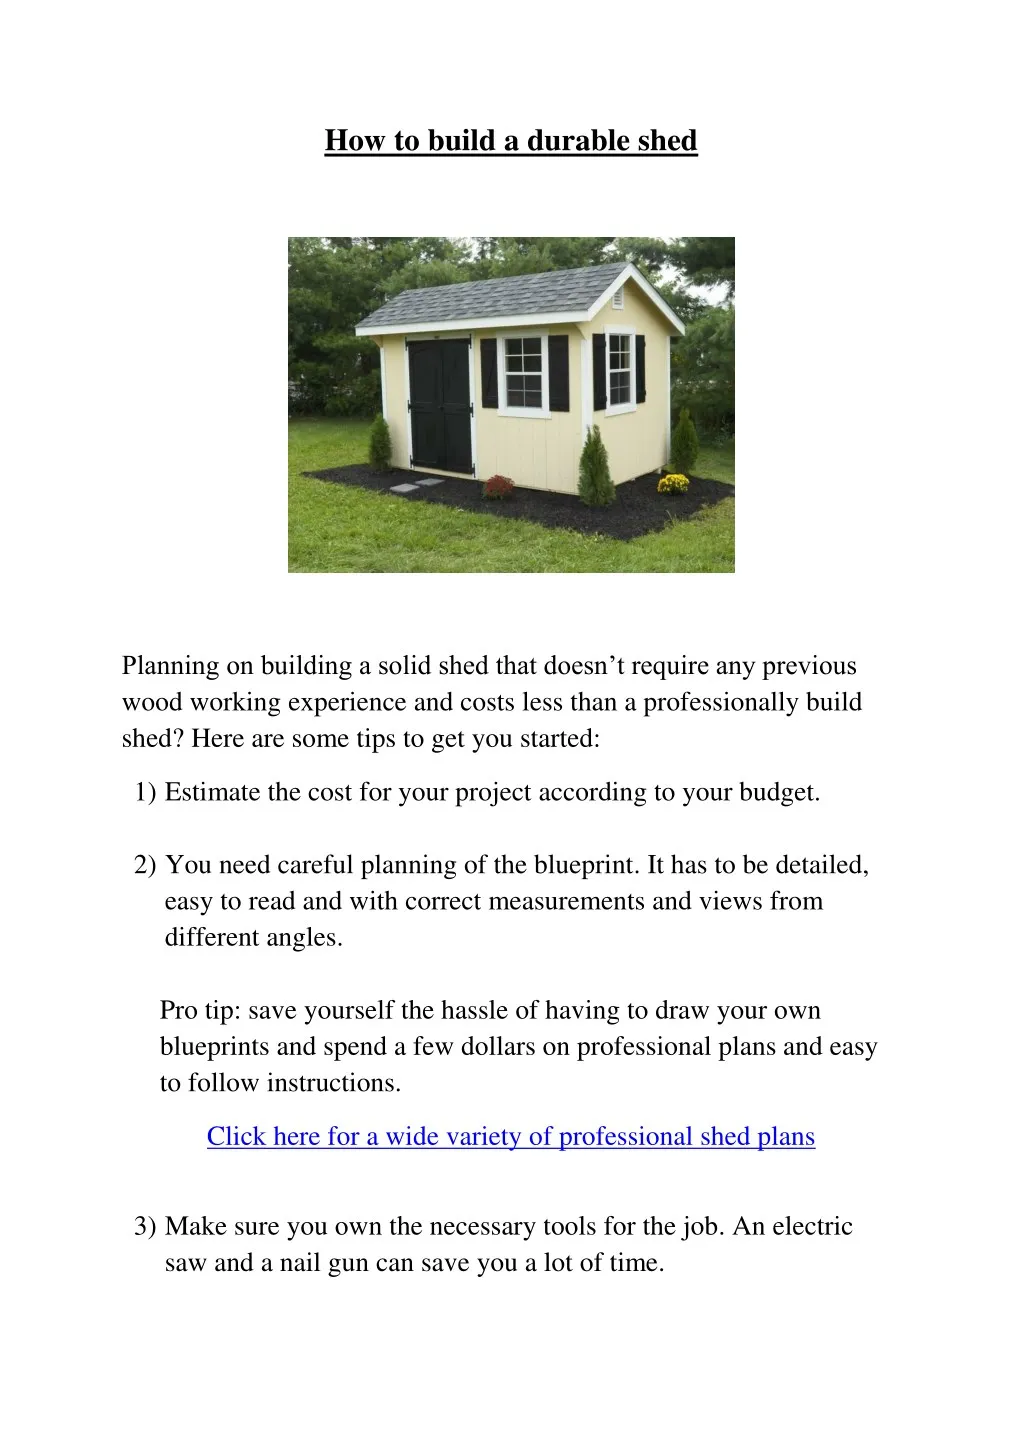 how to build a durable shed